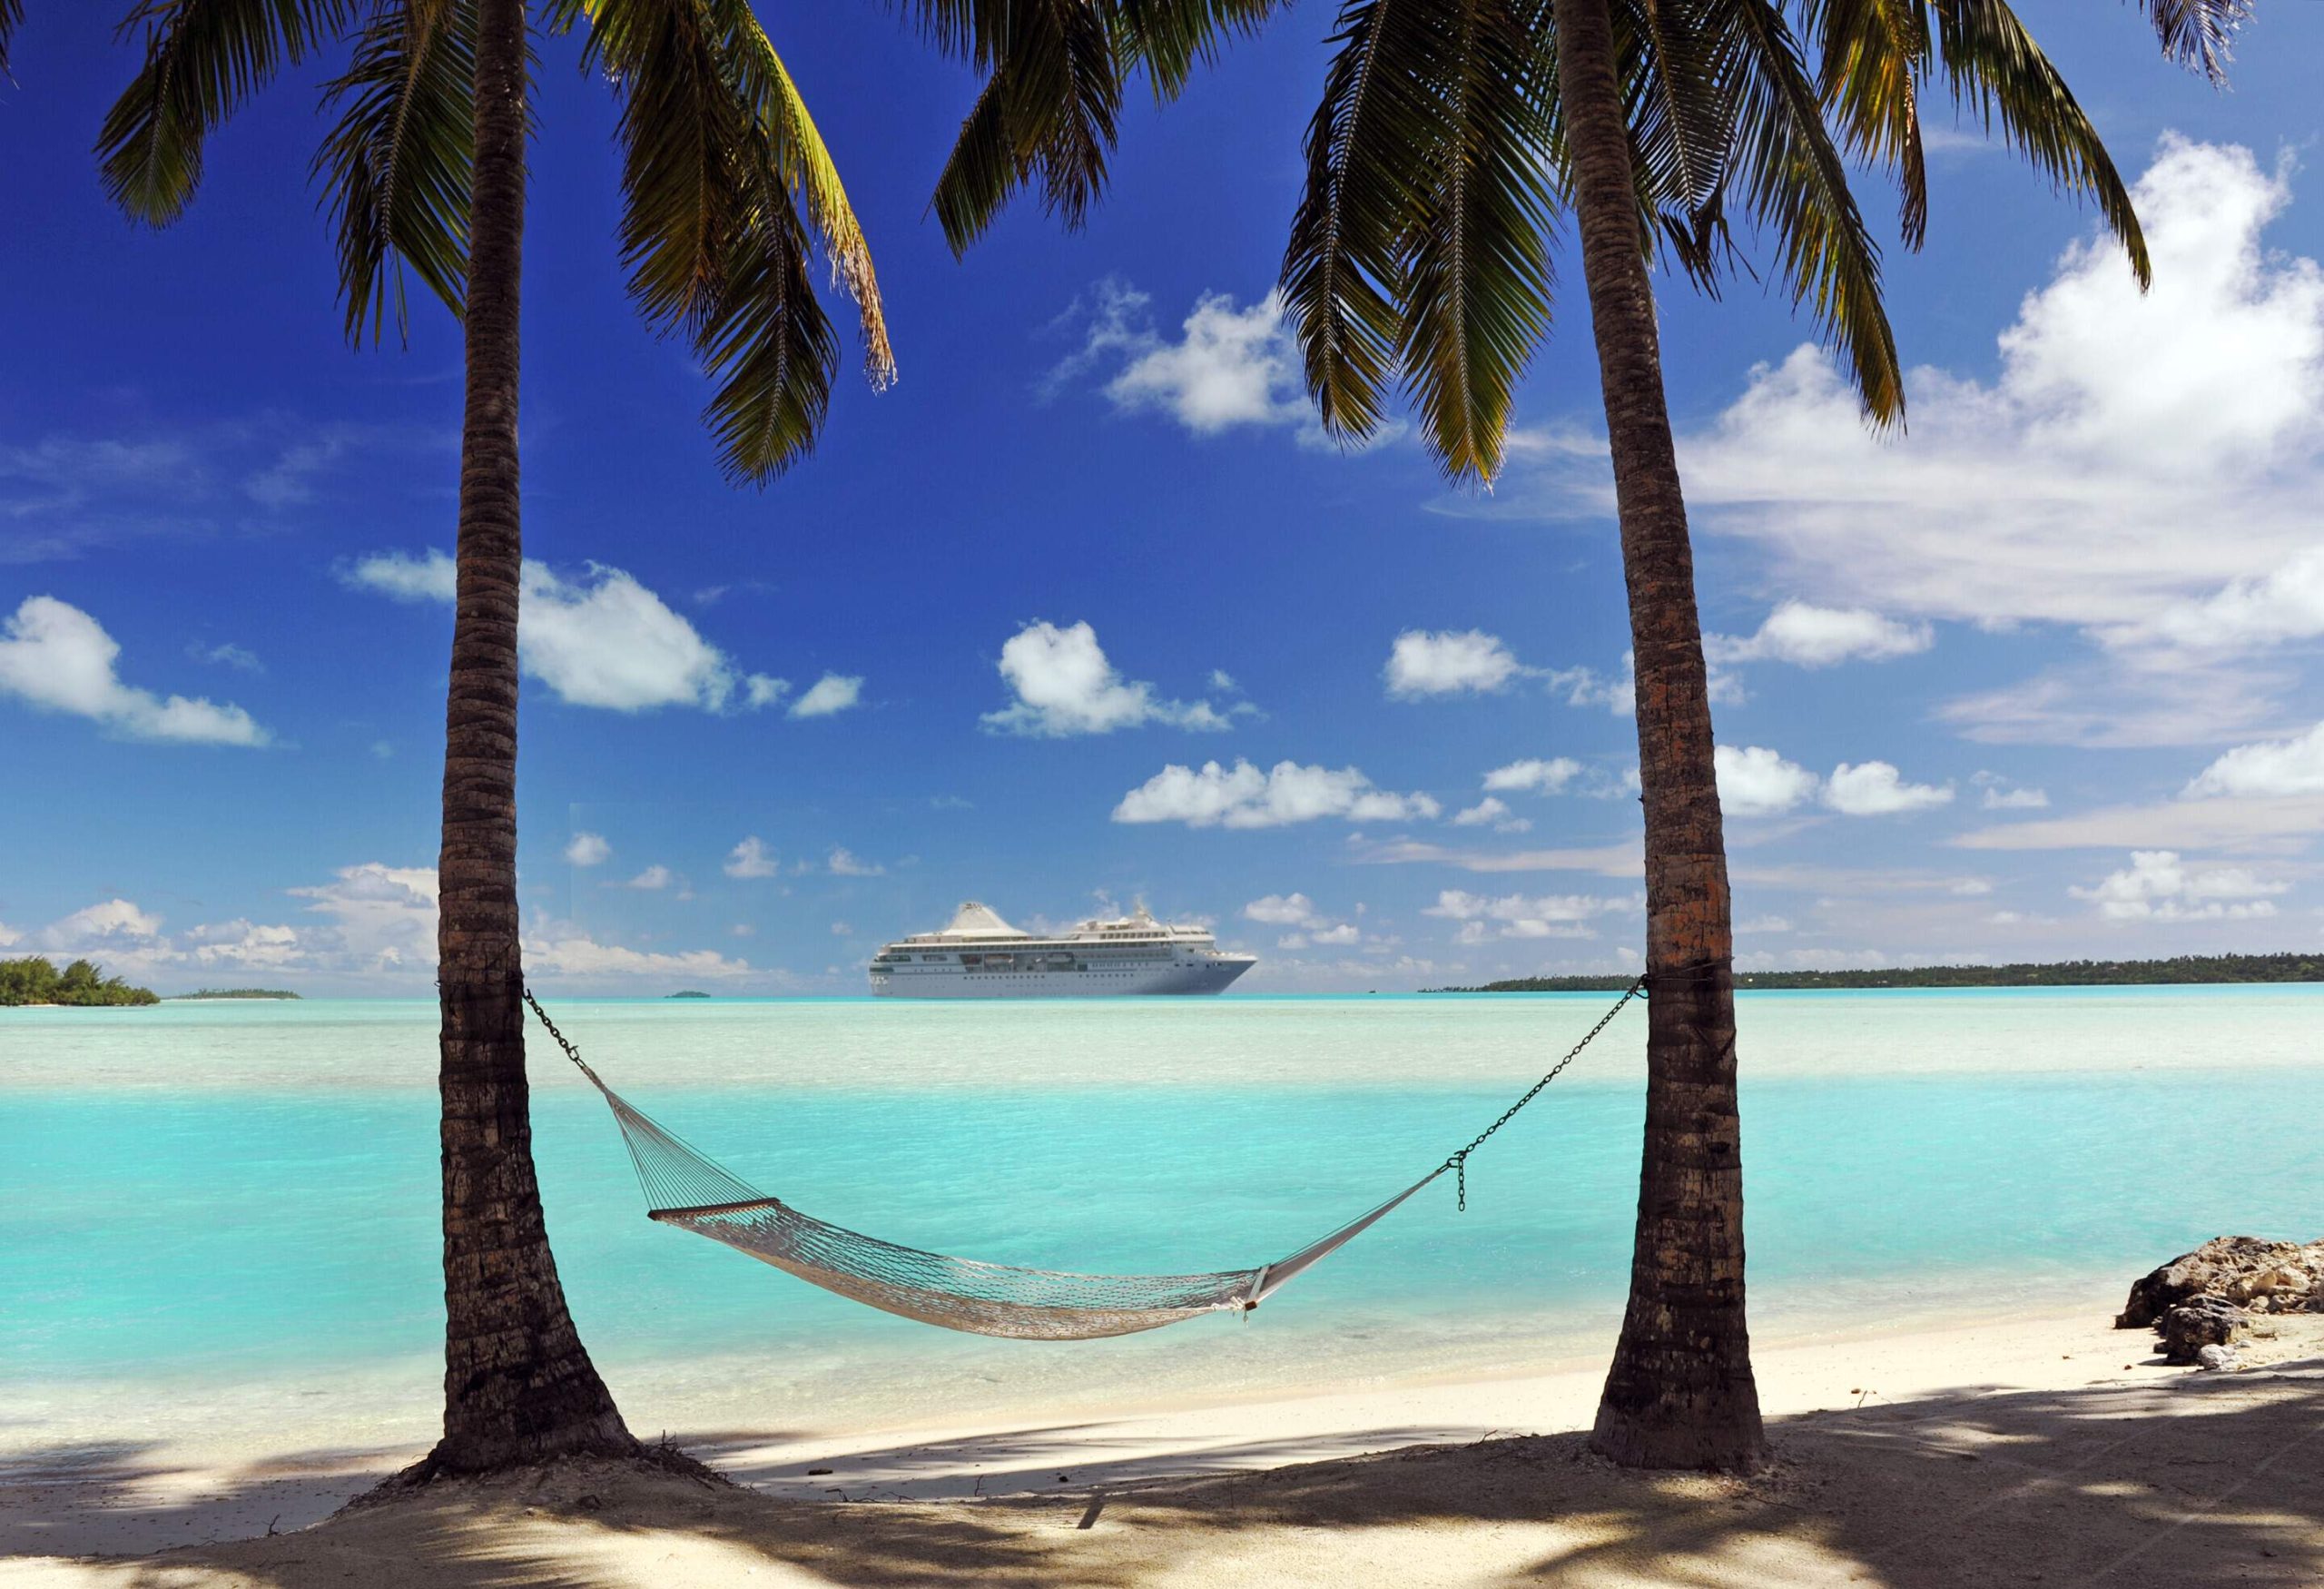 A hammock tied on two palm trees with distant views of a cruise ship in the ocean.